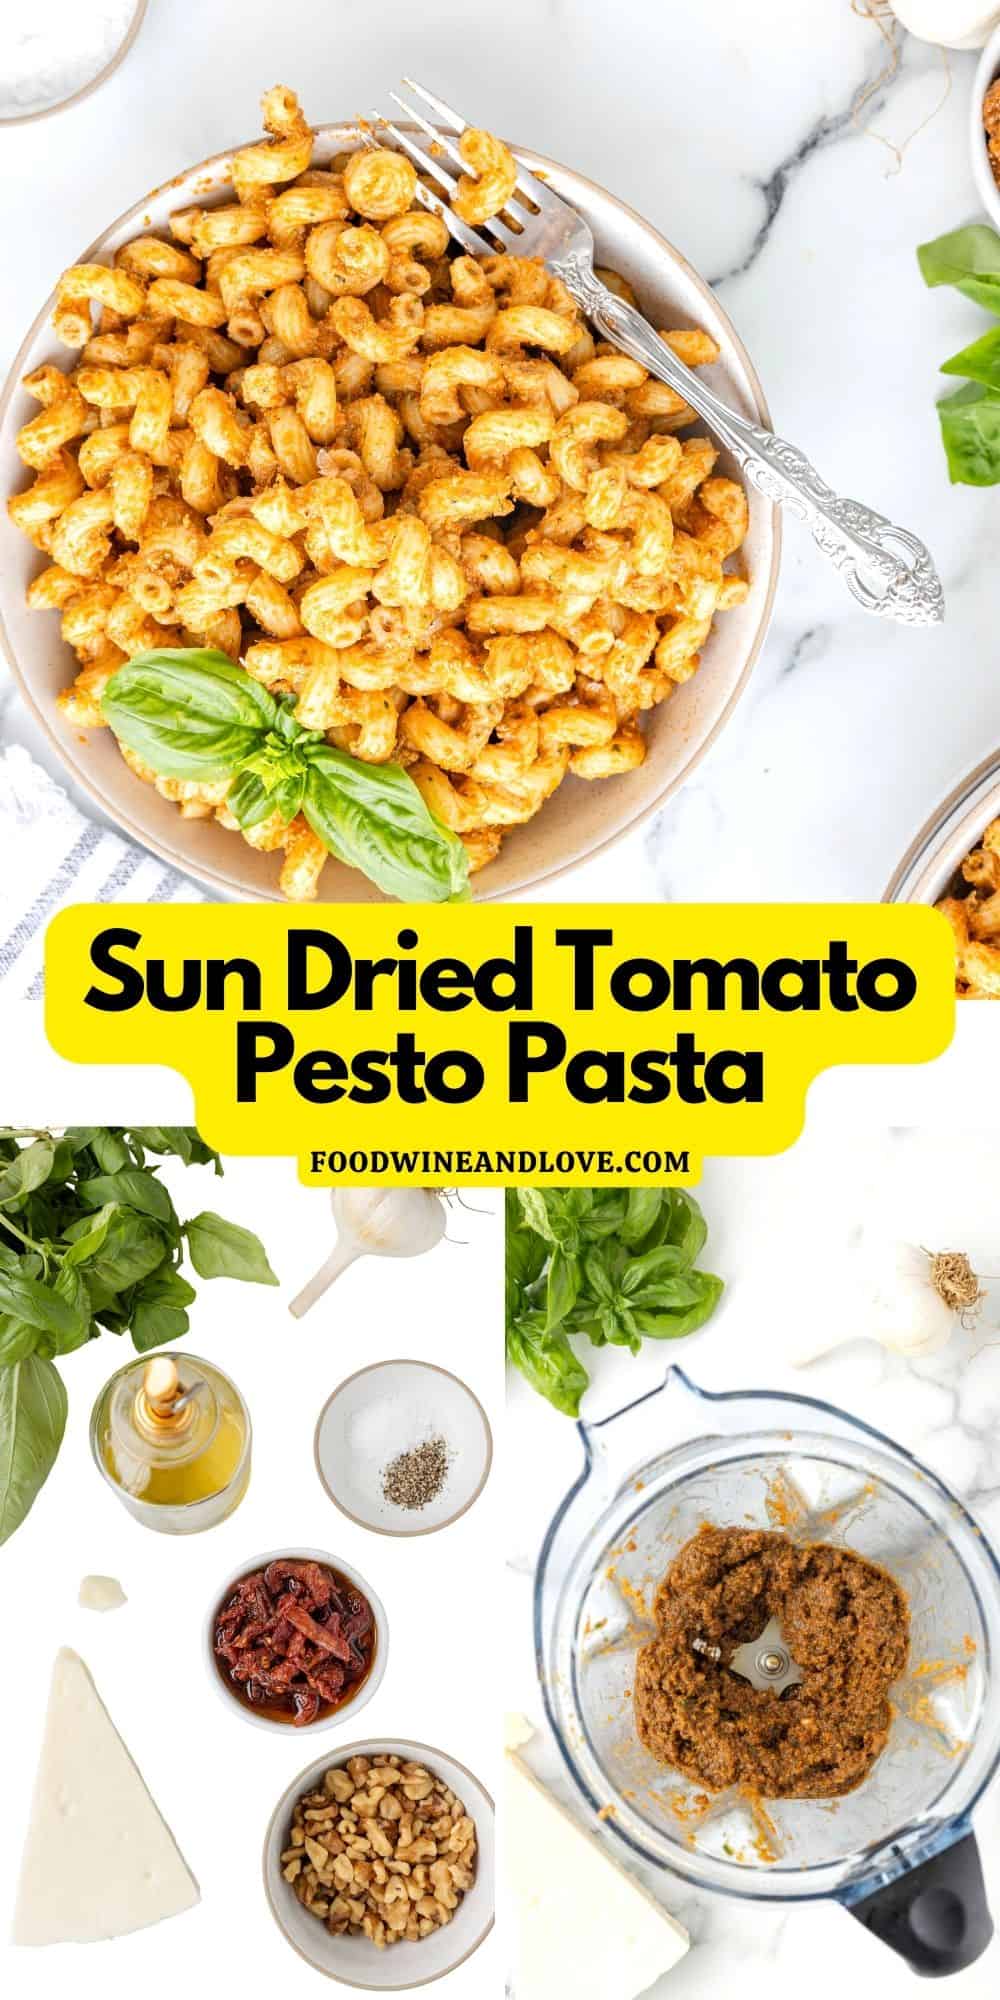 Sun Dried Tomato Pesto Pasta, a simple and delicious Mediterranean diet recipe made with tomatoes, basil, and pine nuts. Vegan, Vegetarian.